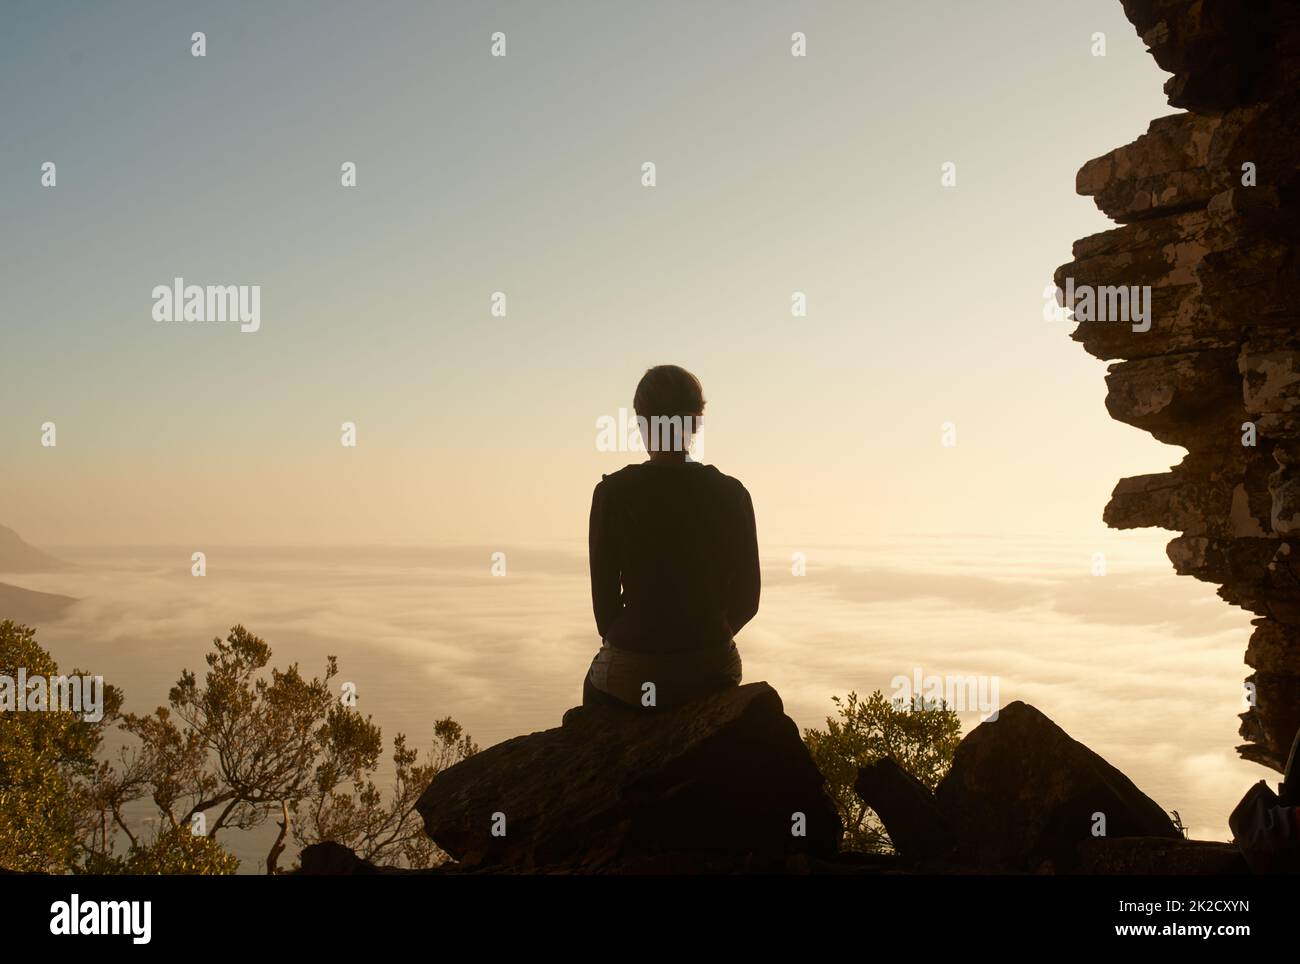 Solitude at sundown. Shot of a woman admiring the view from a mountain top. Stock Photo